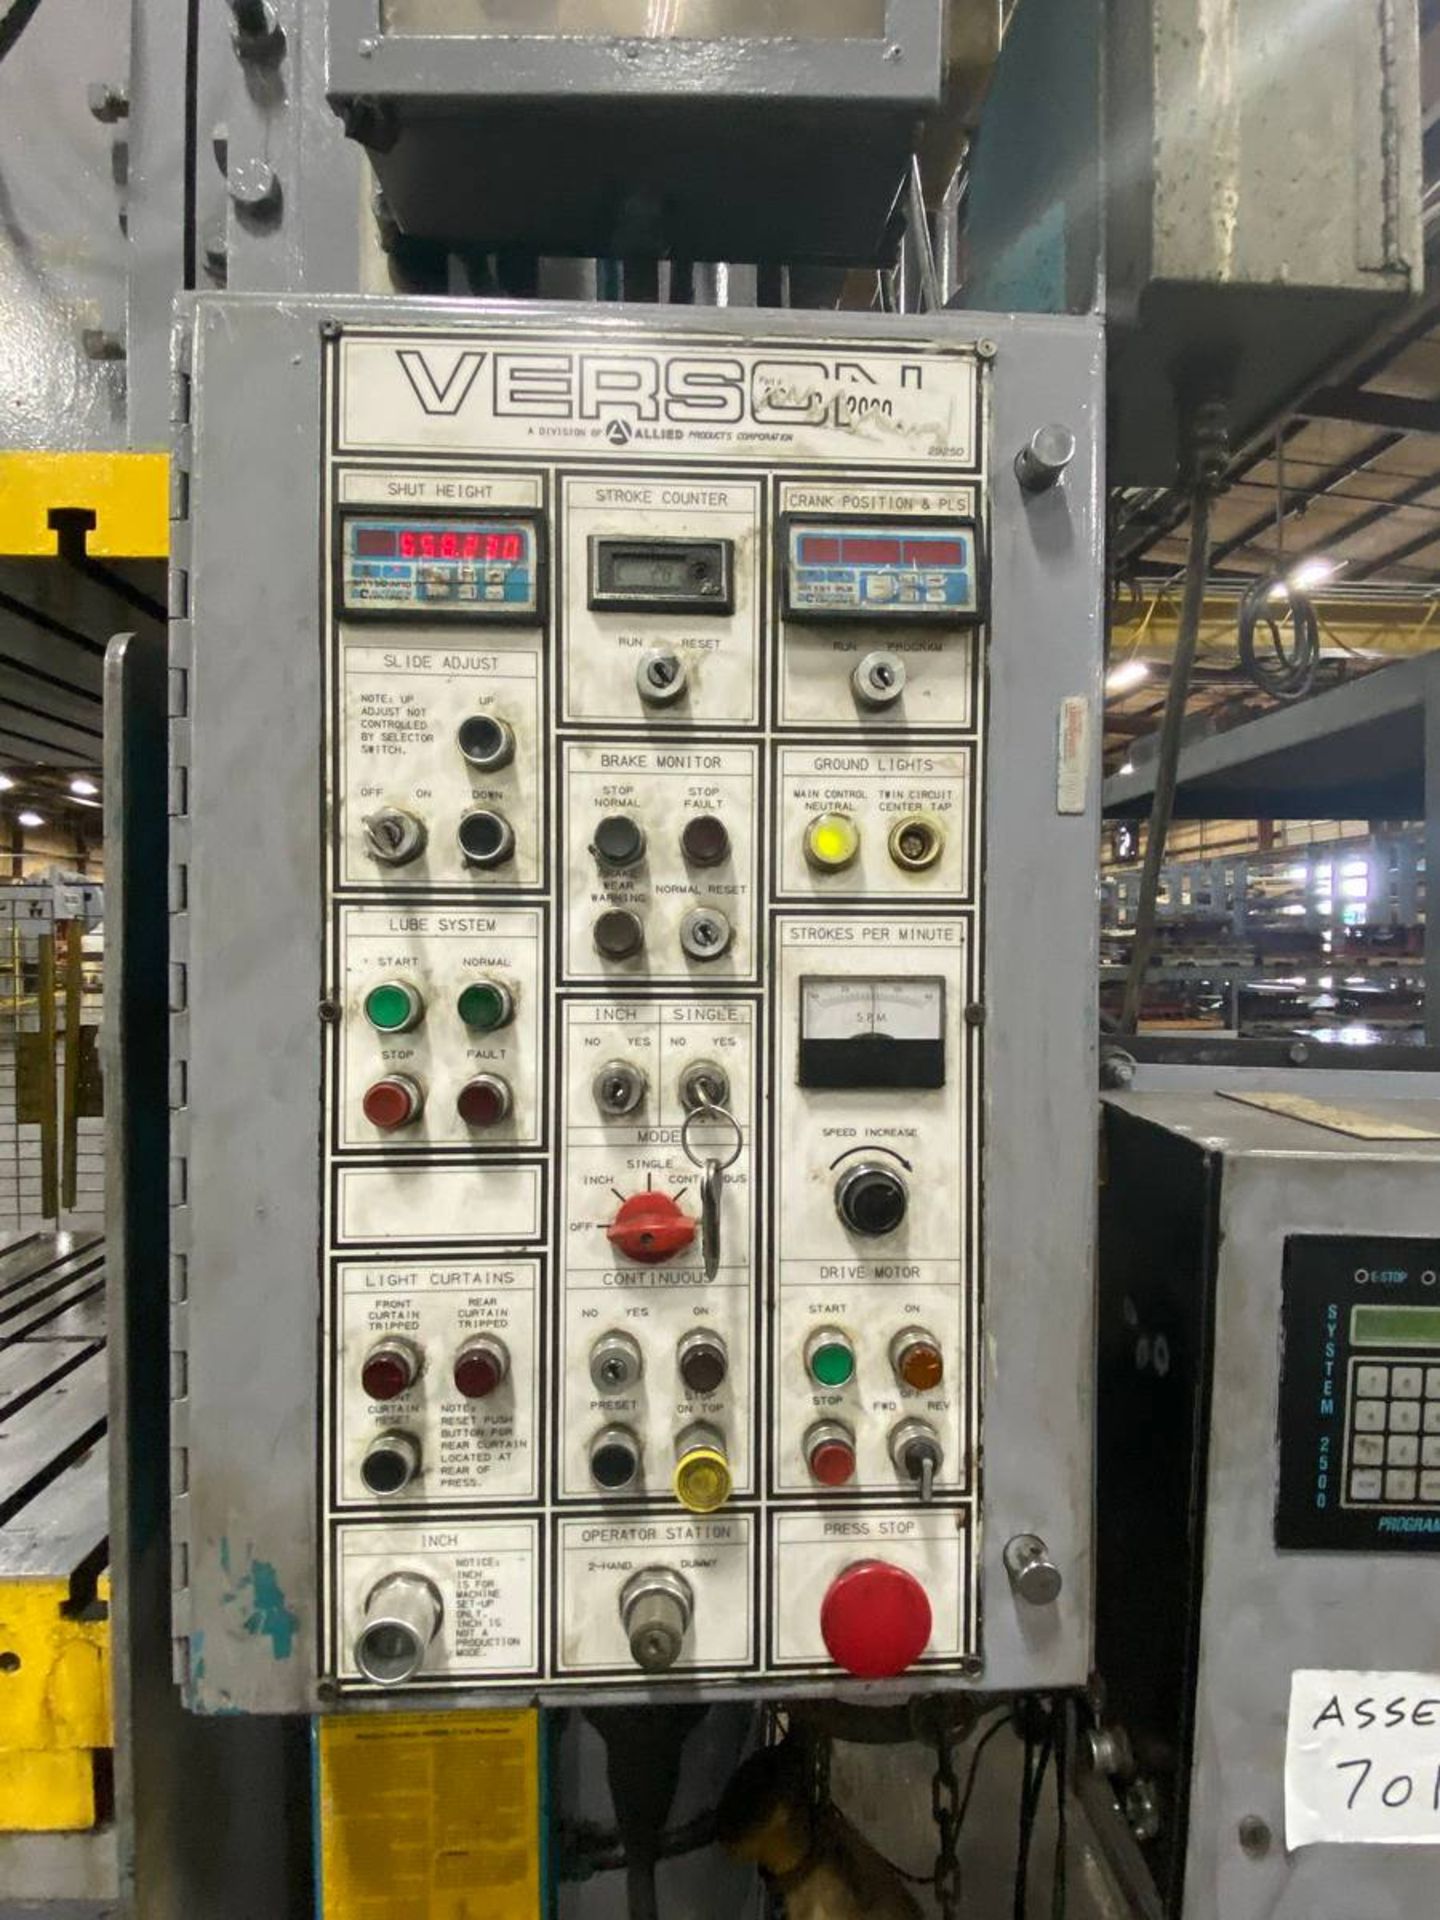 Verson S2-300-96-48T 300 Ton Straight Side Double Crank Press - Image 5 of 7